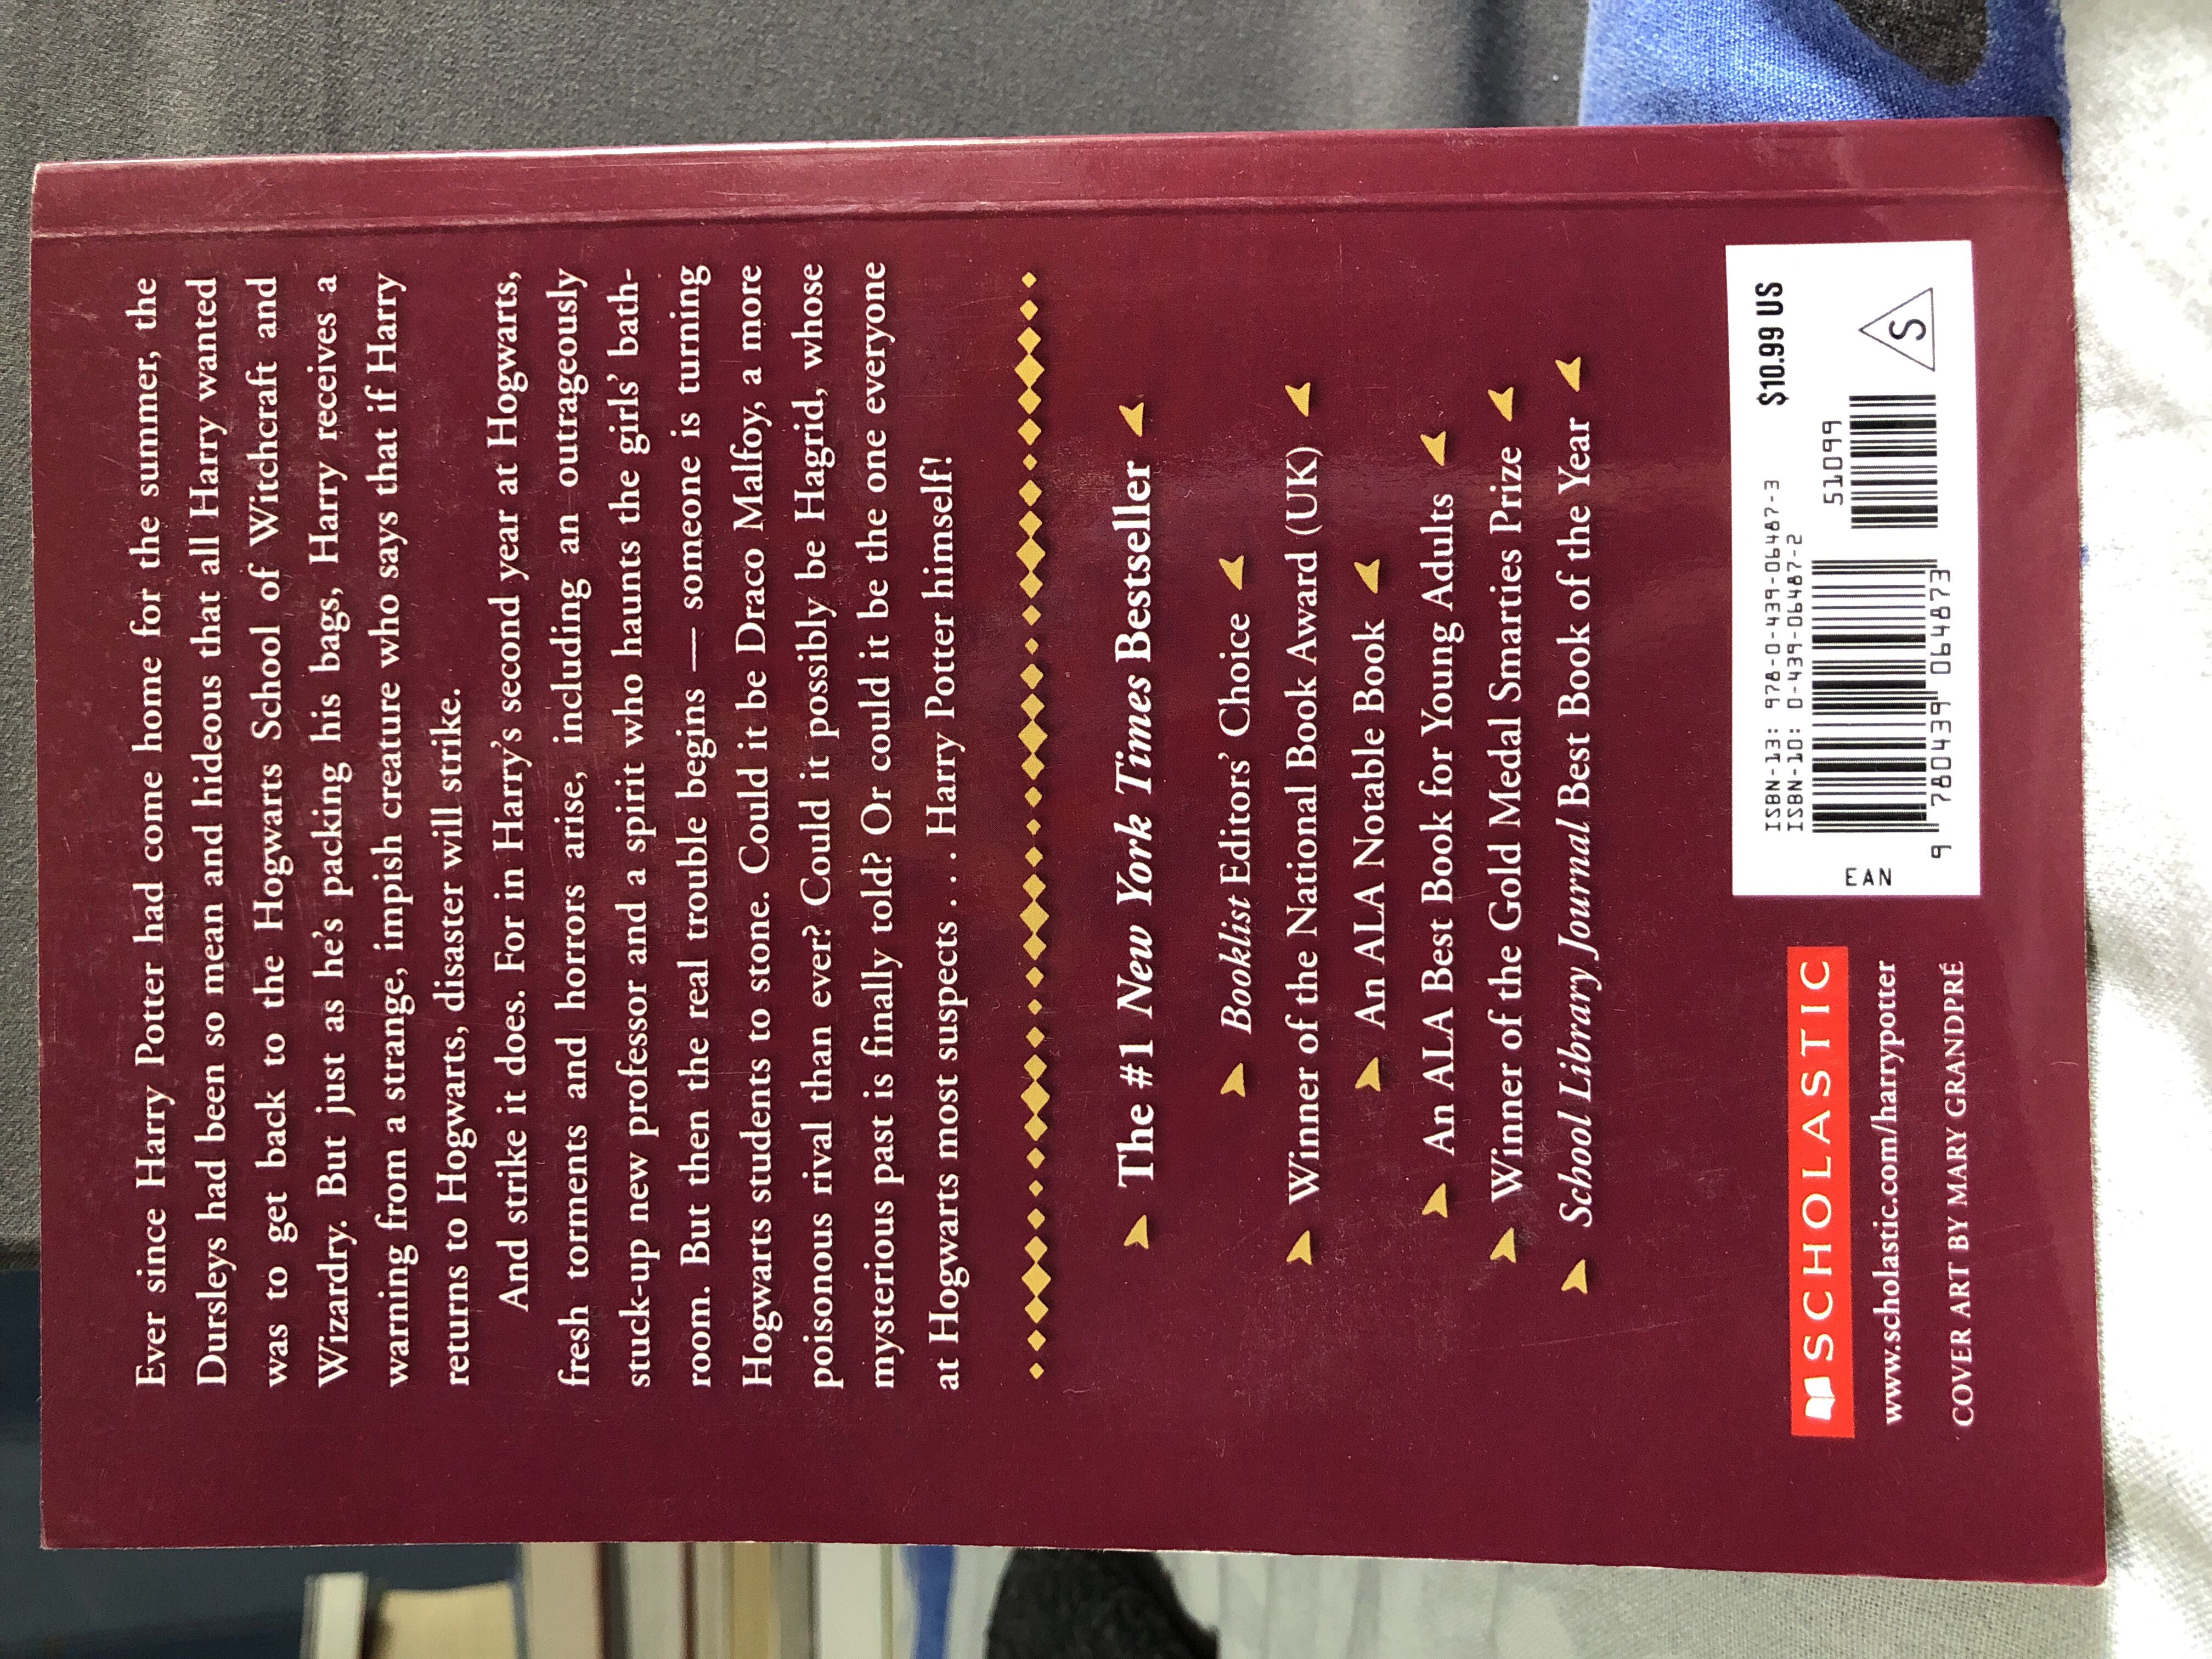 Harry Potter and the Chamber of Secrets - J. K. Rowling (Scholastic - Hardcover) book collectible [Barcode 9780439064873] - Main Image 3